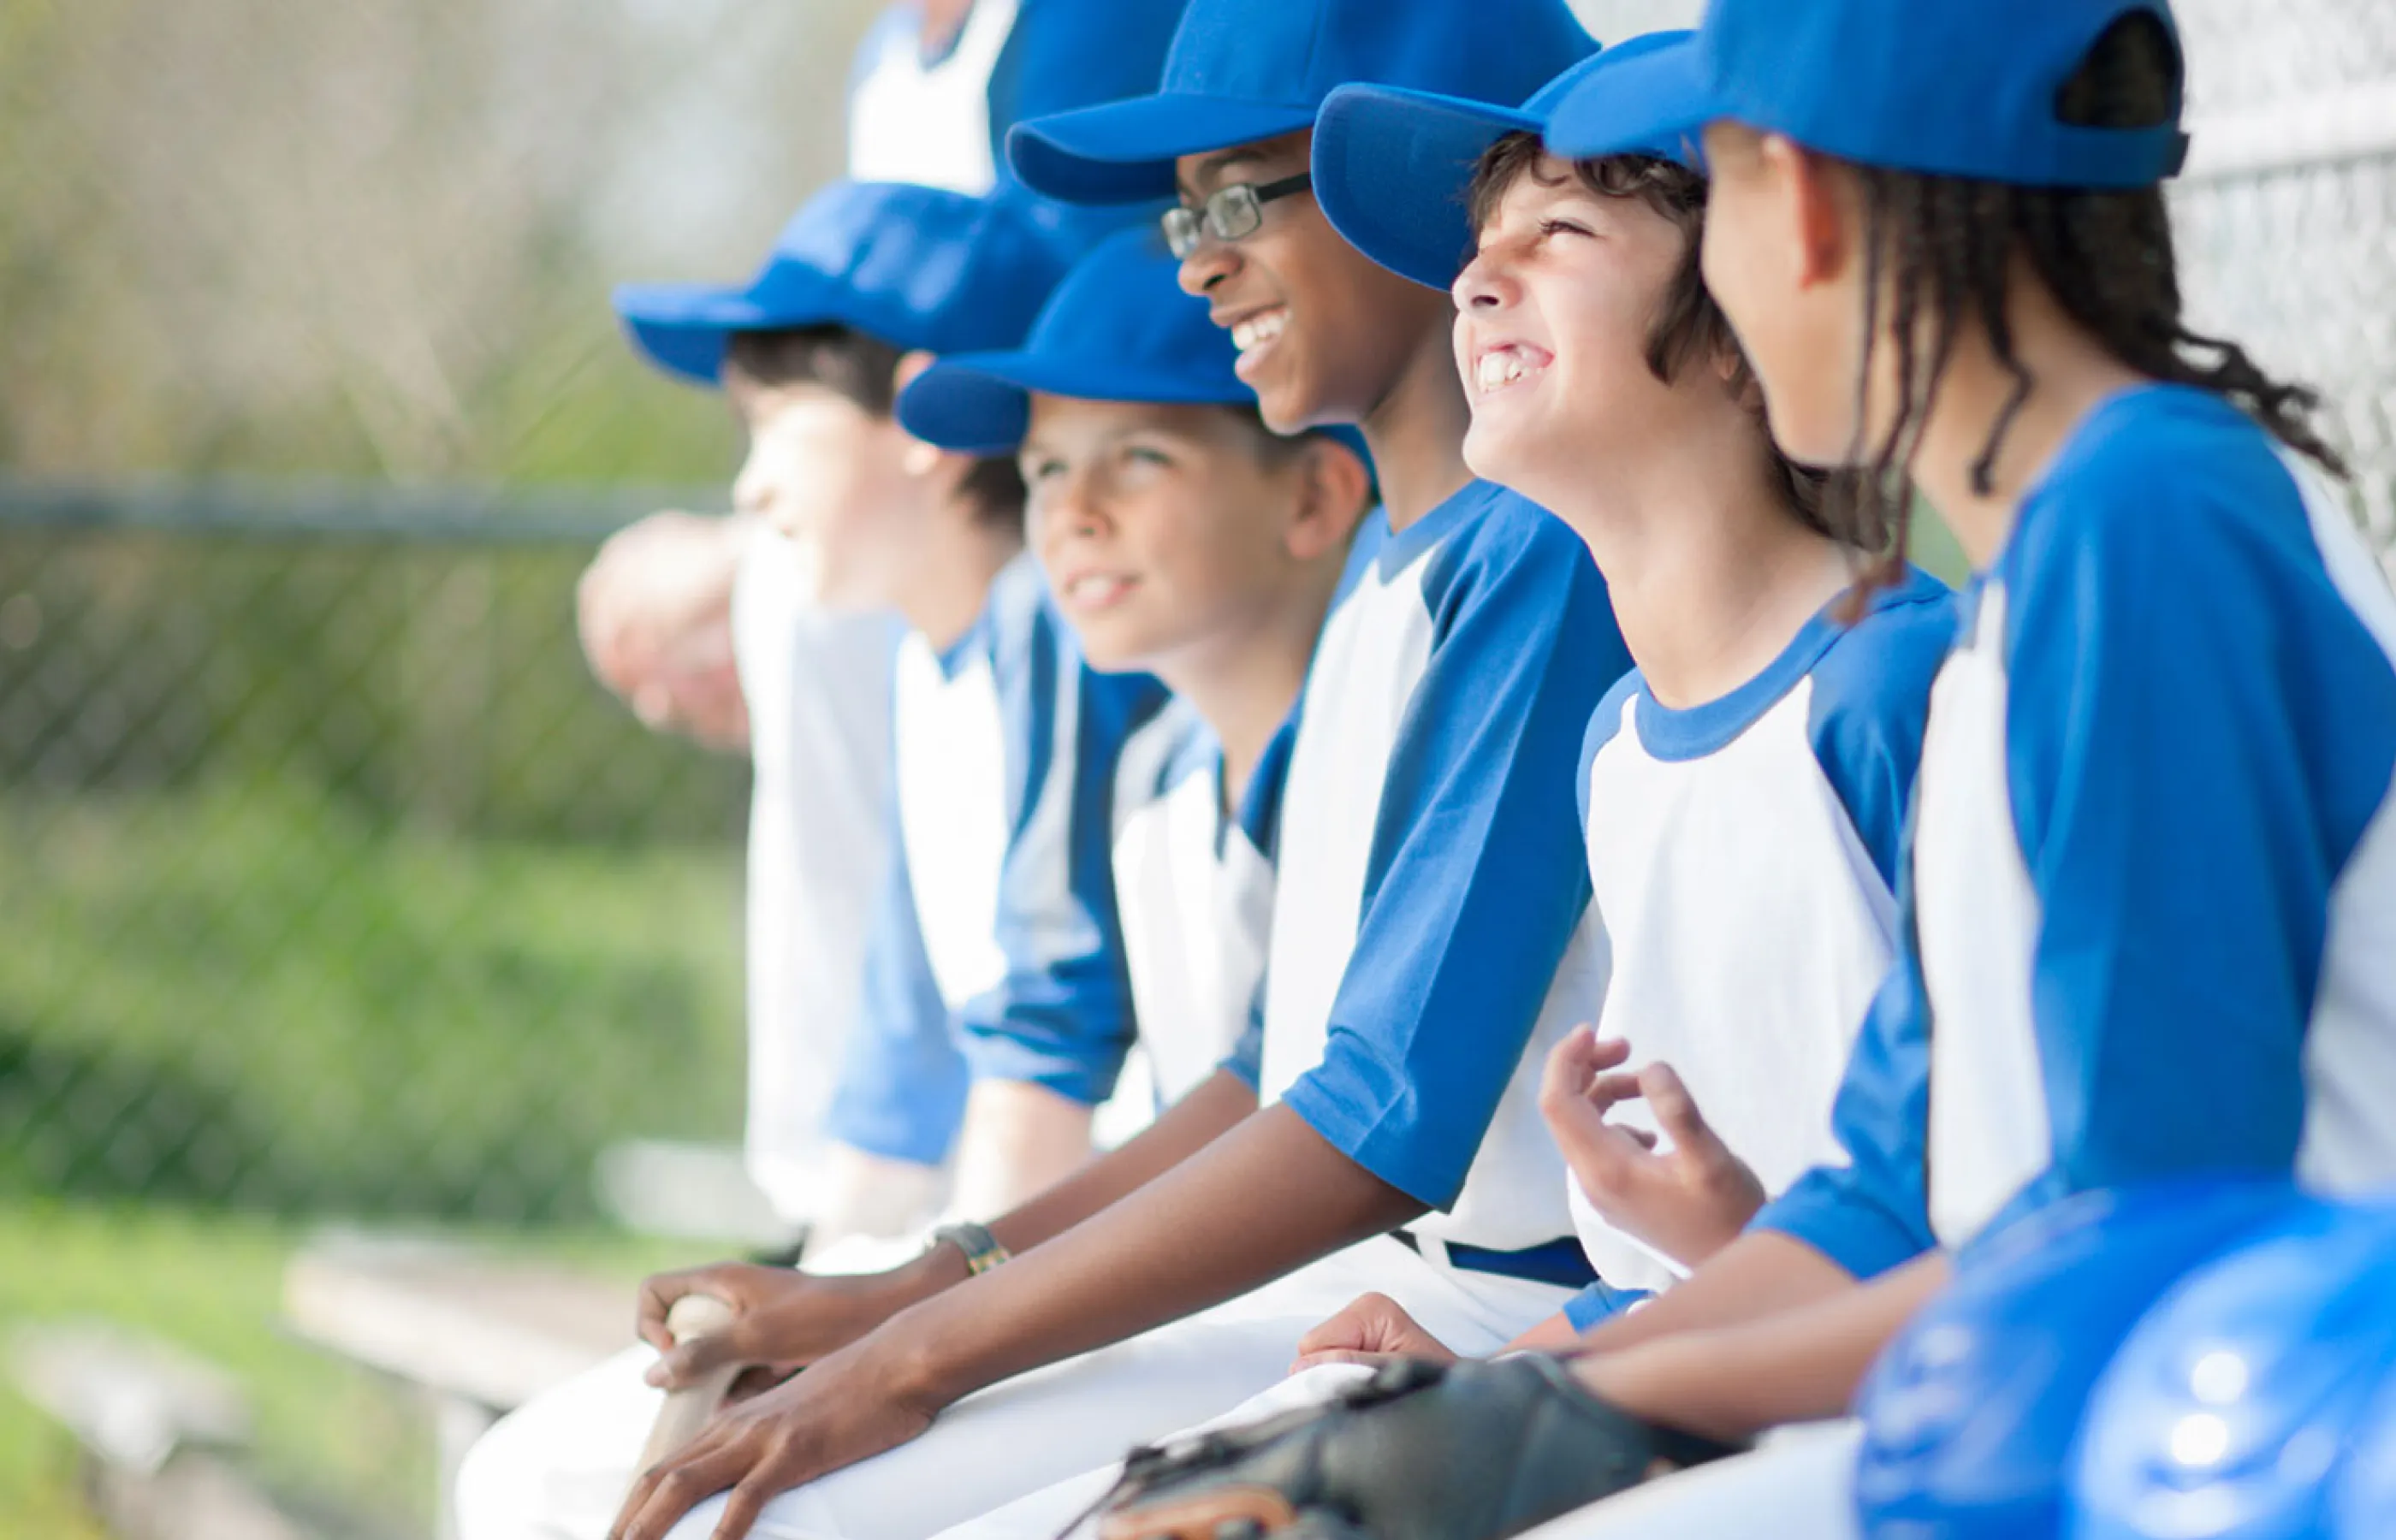 A team of young baseball players are sitting on a bench talking and laughing together